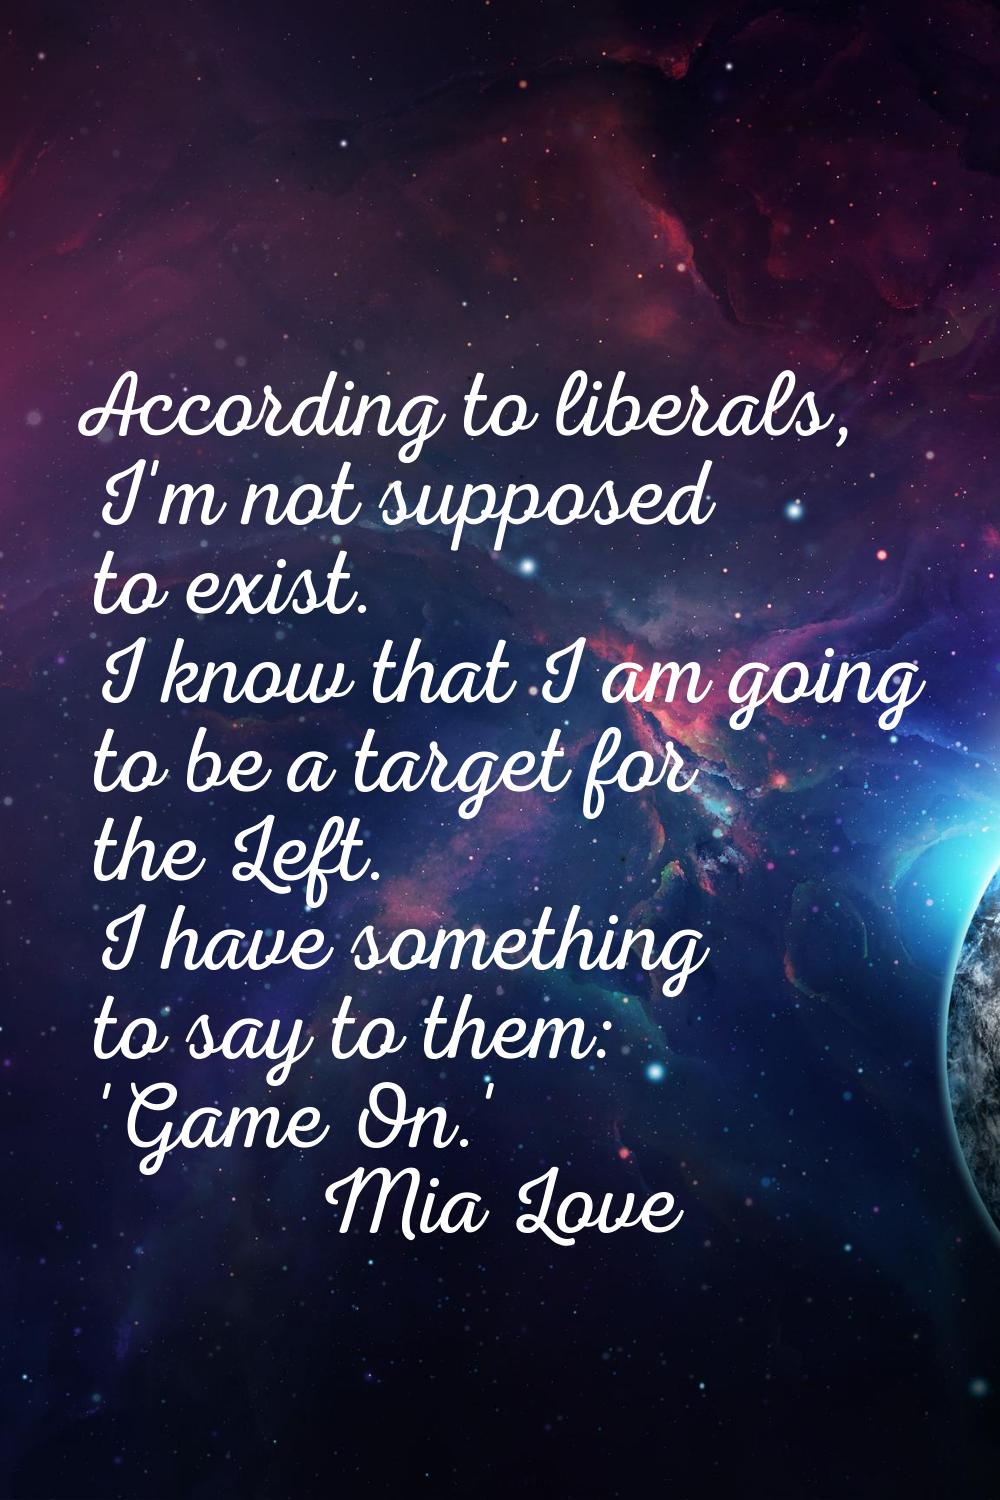 According to liberals, I'm not supposed to exist. I know that I am going to be a target for the Lef